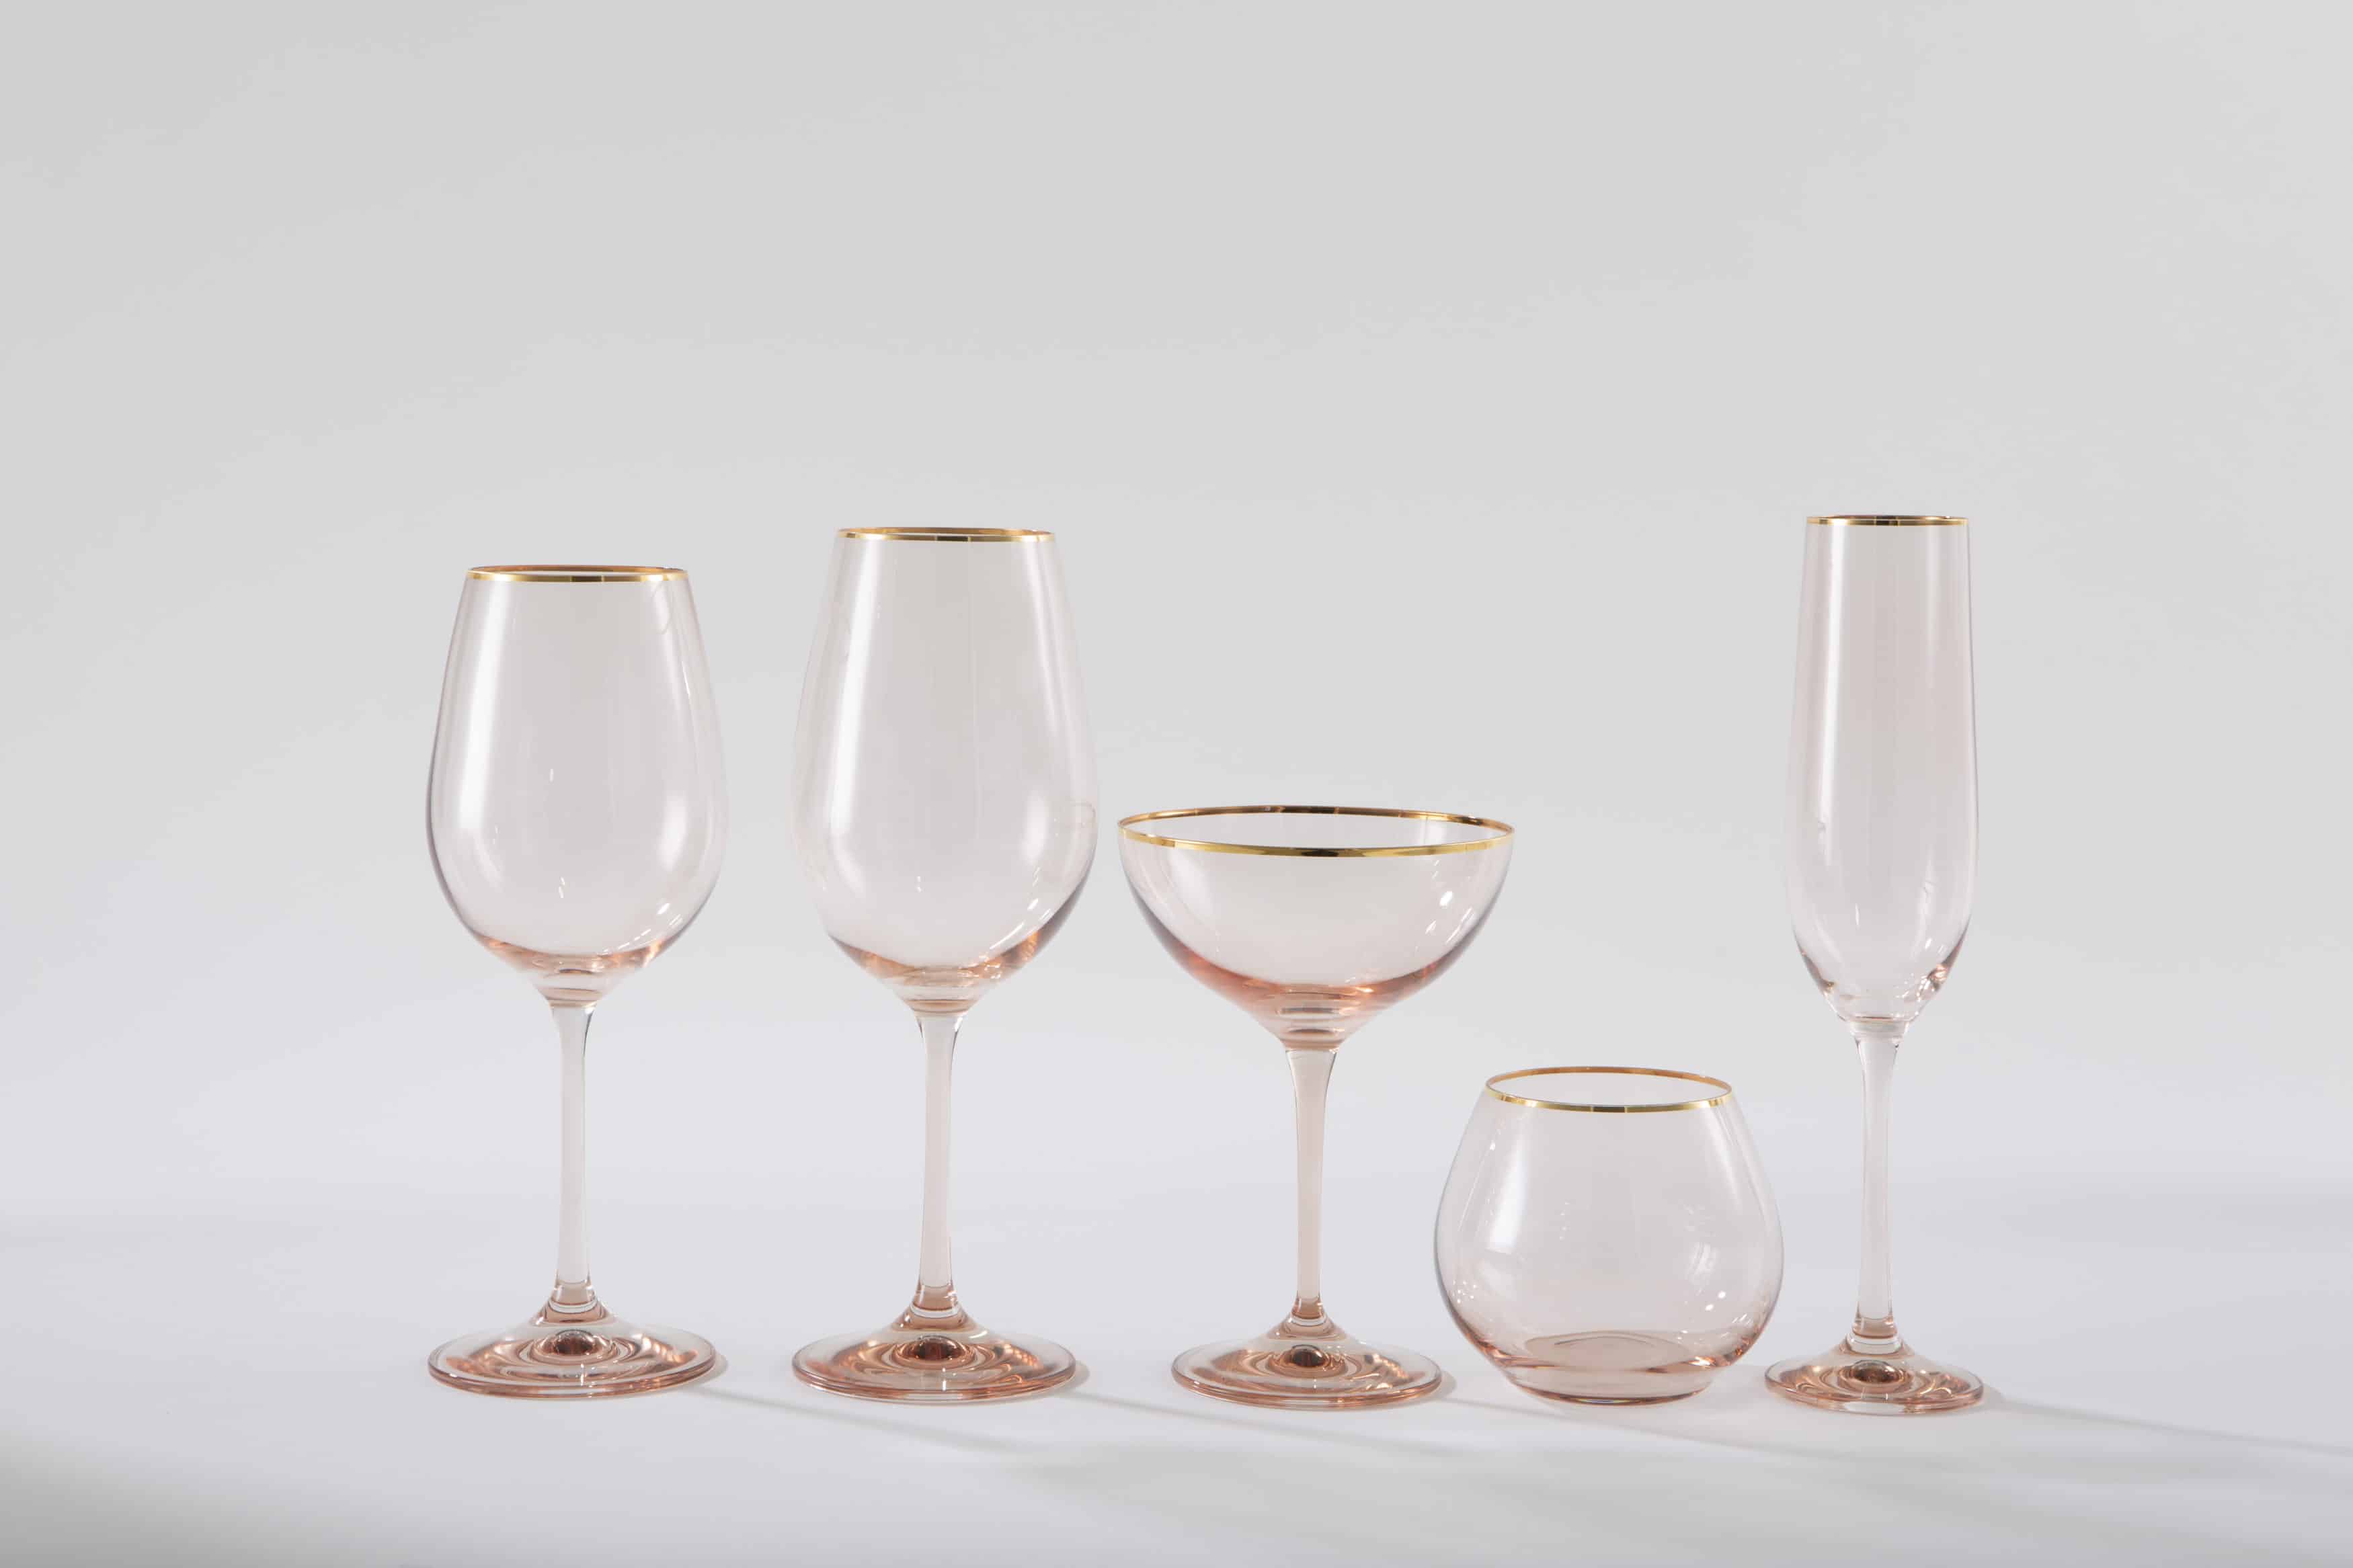  | With the white wine glass Acadia Blush we rent a wine glass with a gold rim and light pink colored glass. Whether for an elegant dinner party, a festive reception or a romantic wedding -  white wine glass Acadia Blush is definitely something special for your event.You can rent more glasses of the Acadia Blush series with pink colored glass to go with the wine glass. The complete Acadia Blush series includes water cups, white wine glass, red wine glass, champagne glass and champagne bowl. | 